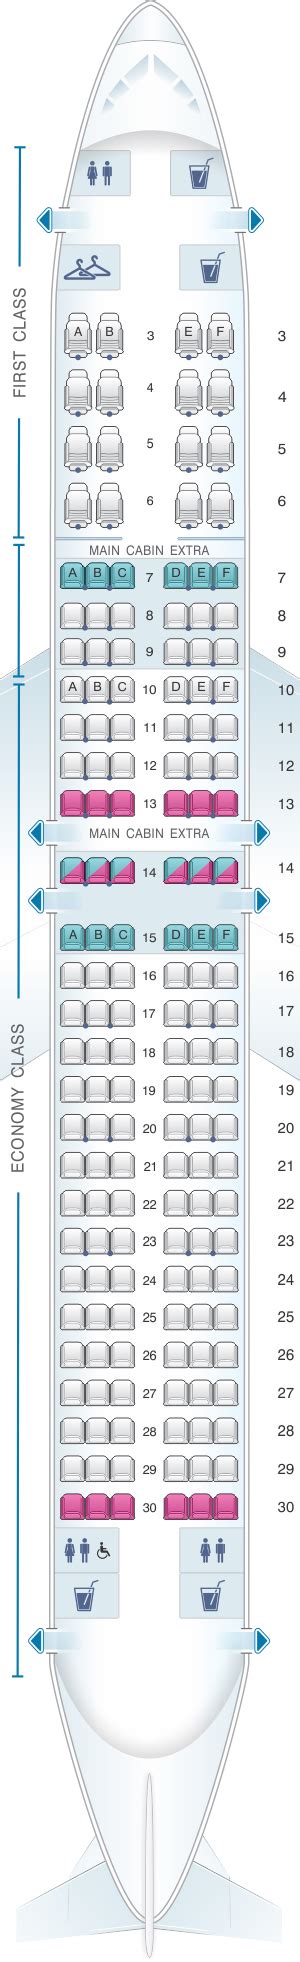 None of the seats on this aircraft recline. Ryanair now offers Premium seats in rows 1-5, 16, 17, 32, and 33. Which gives travelers priority boarding, extra legroom and faster disembarking for a fee of €17/£15. Standard seats in rows 6-15 and 18-31- travelers can preselect any seat in these rows for a fee of €5/£5.. 